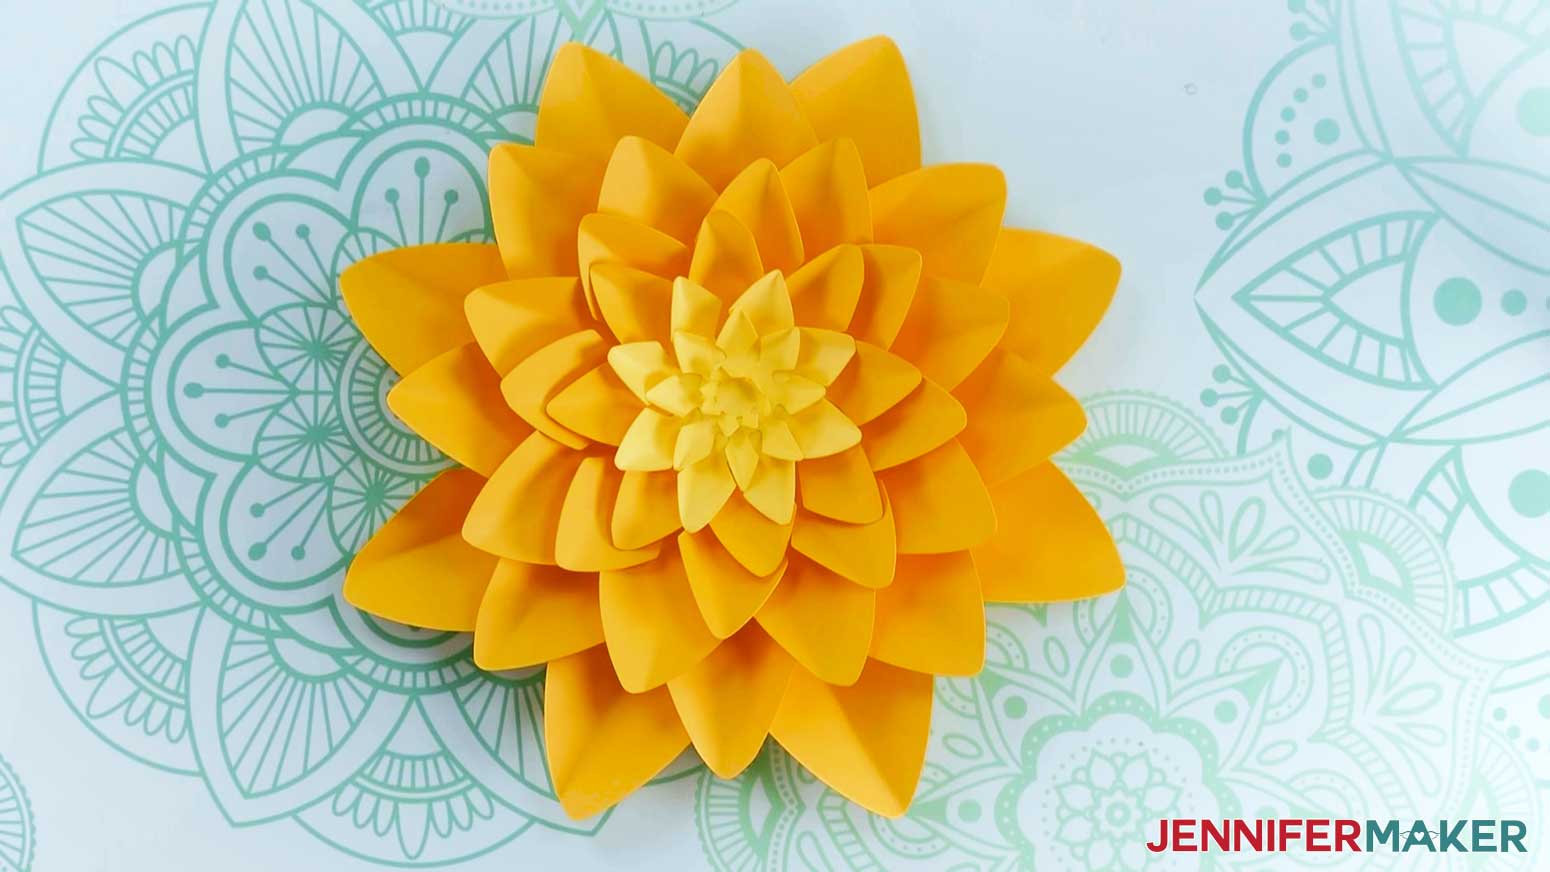 Image of assembled 8 inch broad petal Giant Paper Dahlia